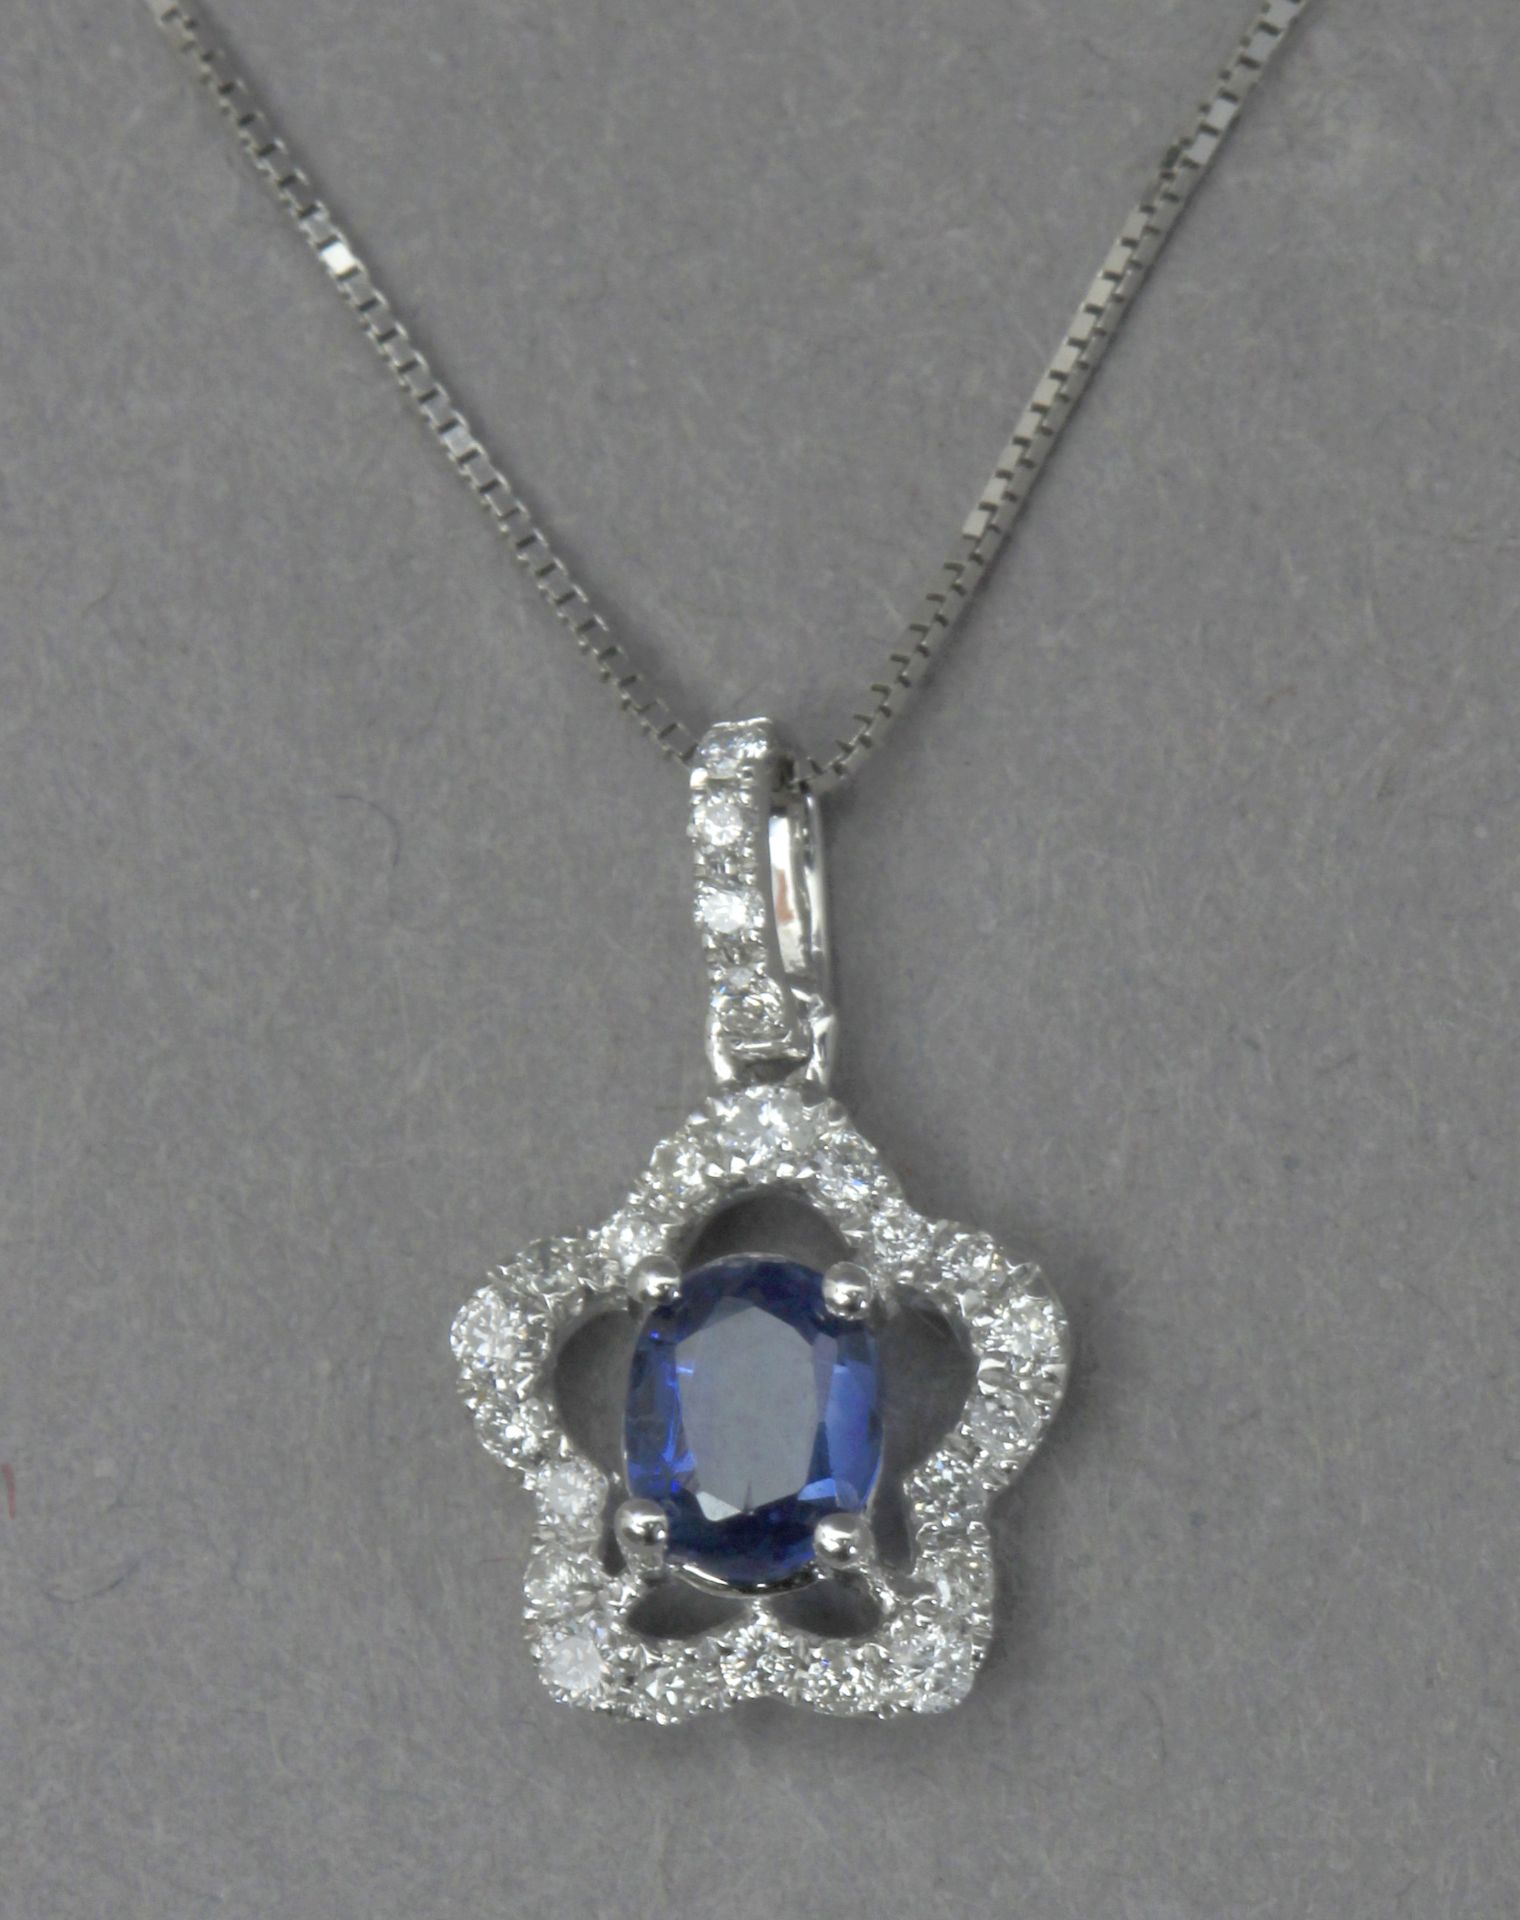 A kyanite and diamond pendant with an 18k. white gold chain